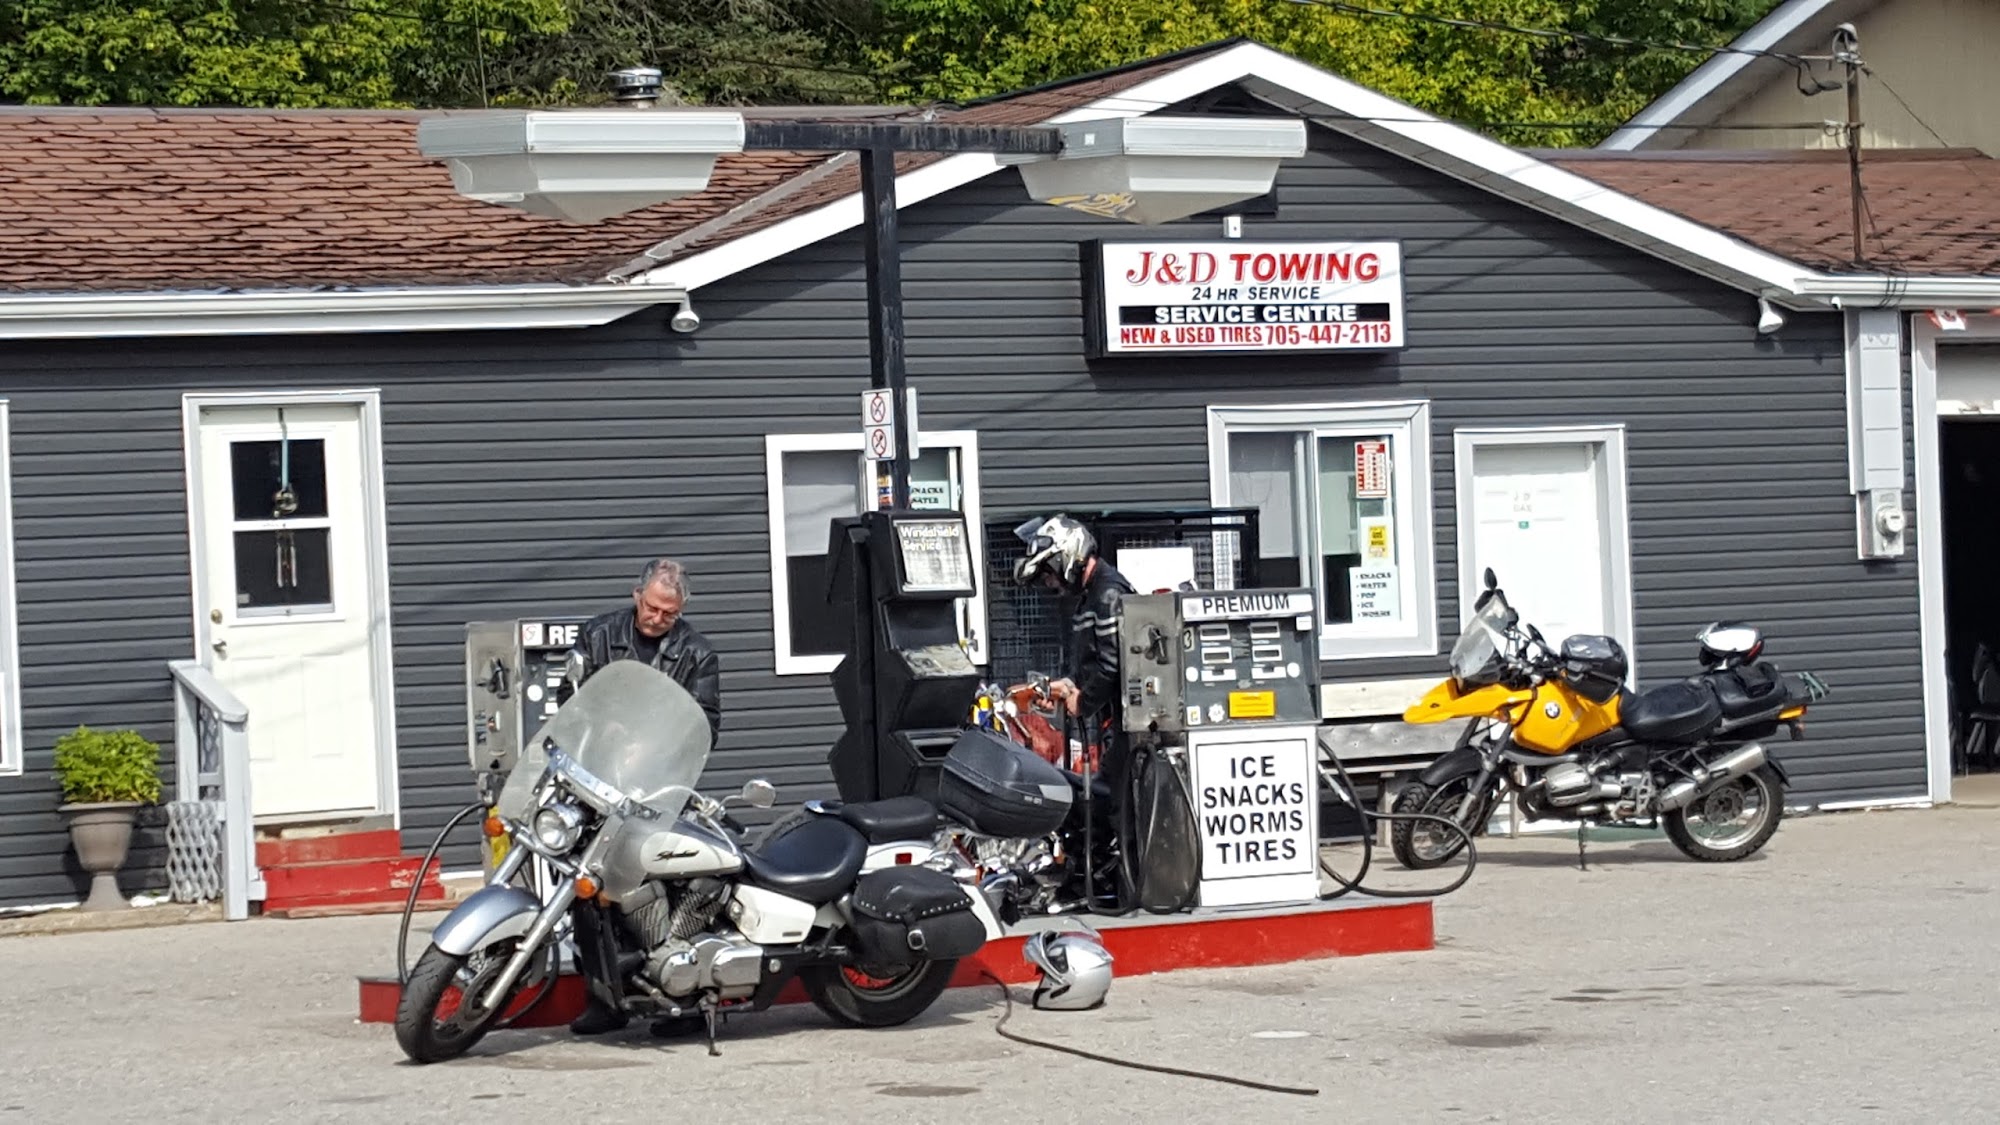 J & D Towing & Gas station